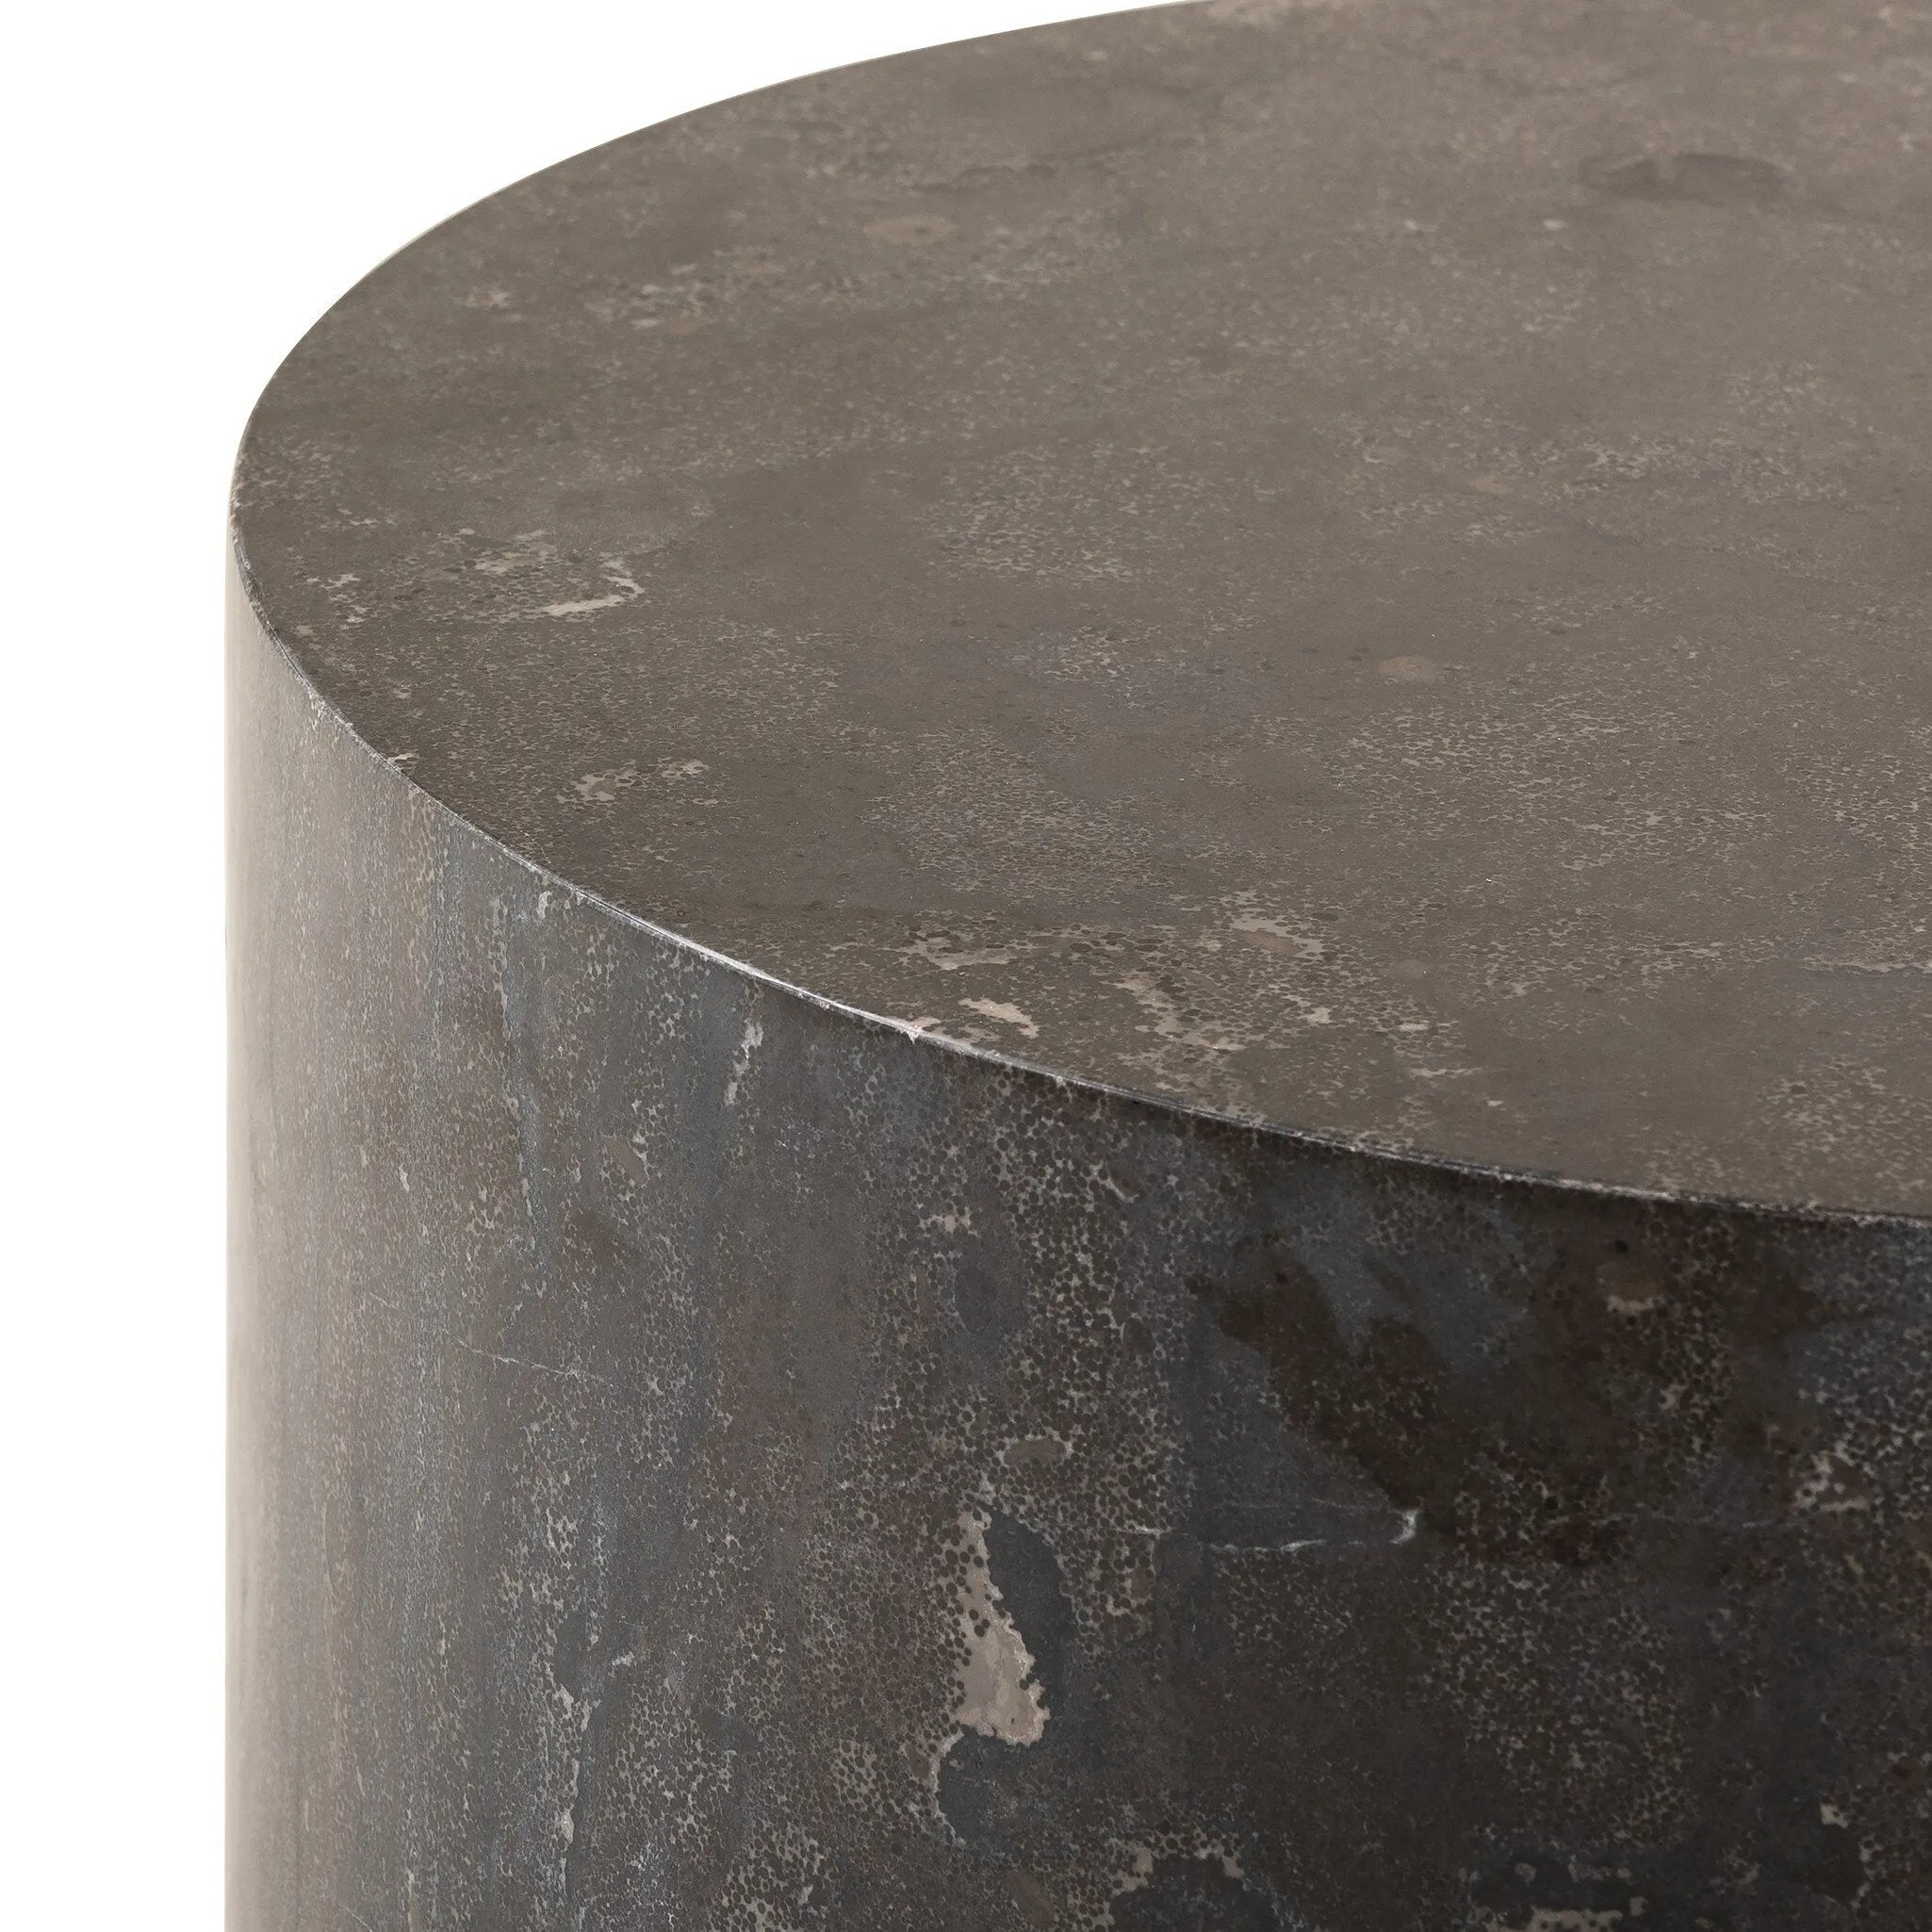 A cylinder-shaped end tables brings an organic look to the living room. Made from natural polished bluestone.Collection: Hughe Amethyst Home provides interior design, new home construction design consulting, vintage area rugs, and lighting in the Portland metro area.